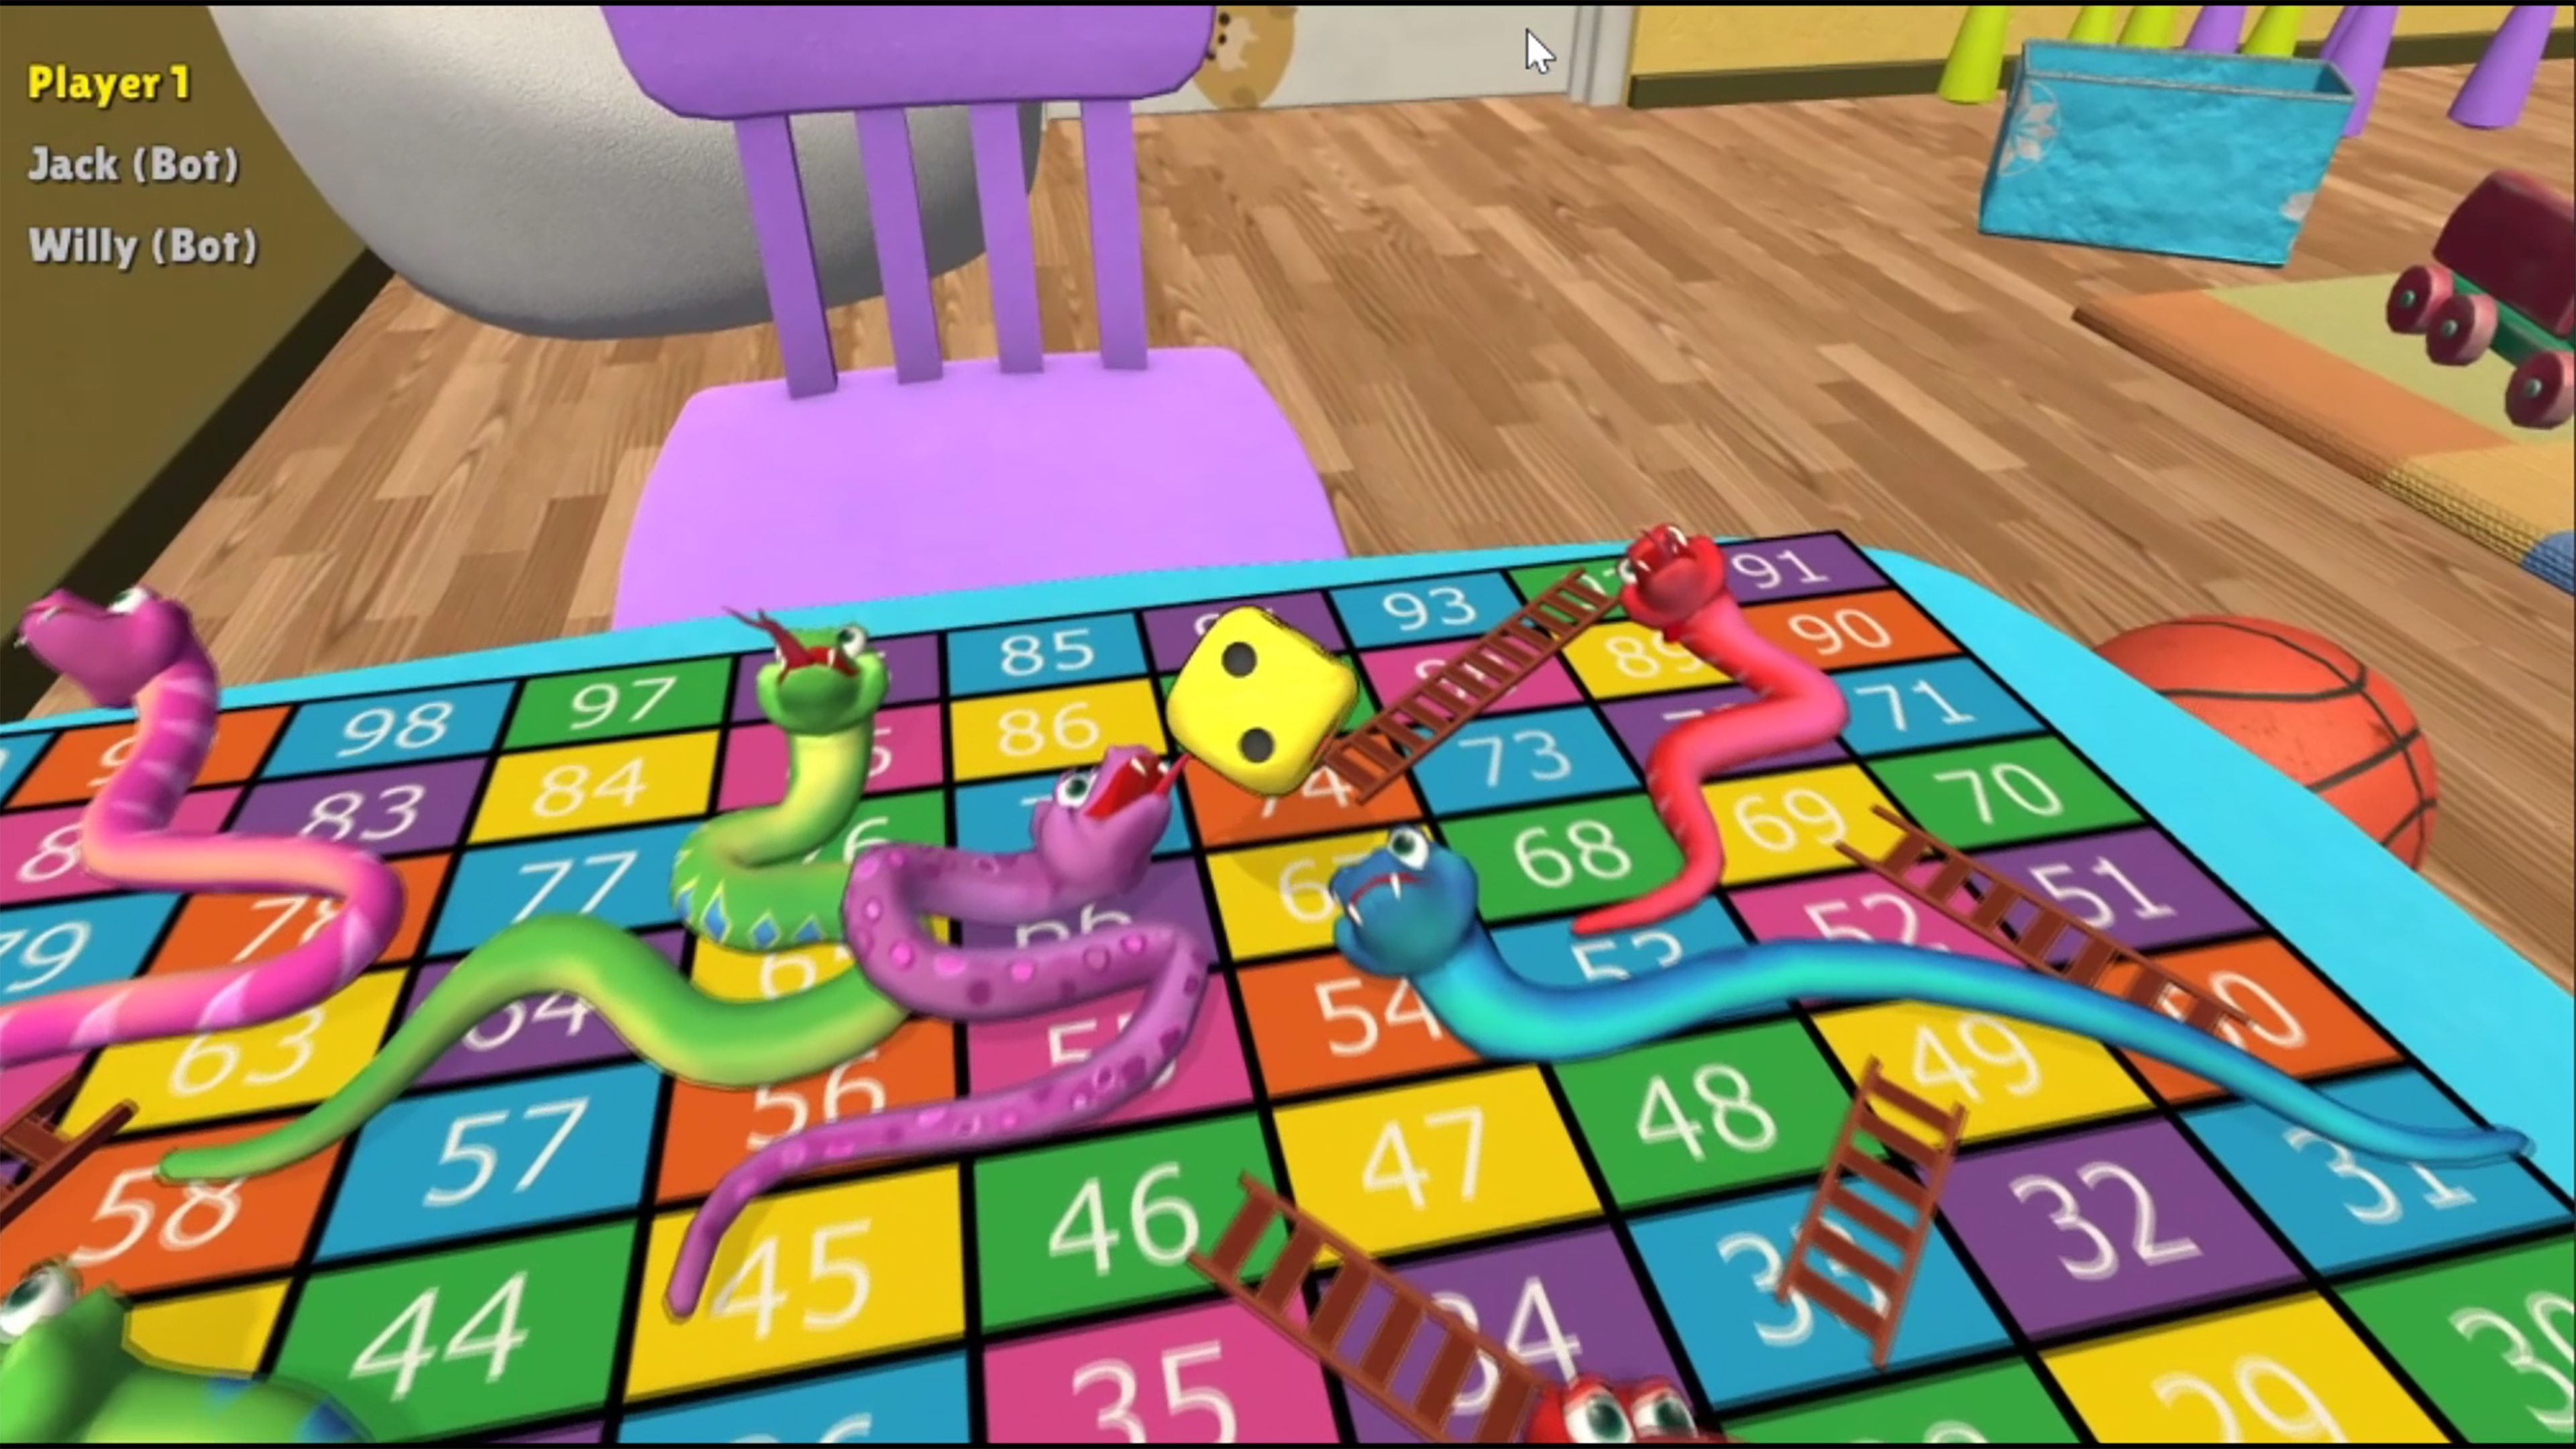 snakes-and-ladders-on-ps4-official-playstation-store-uk